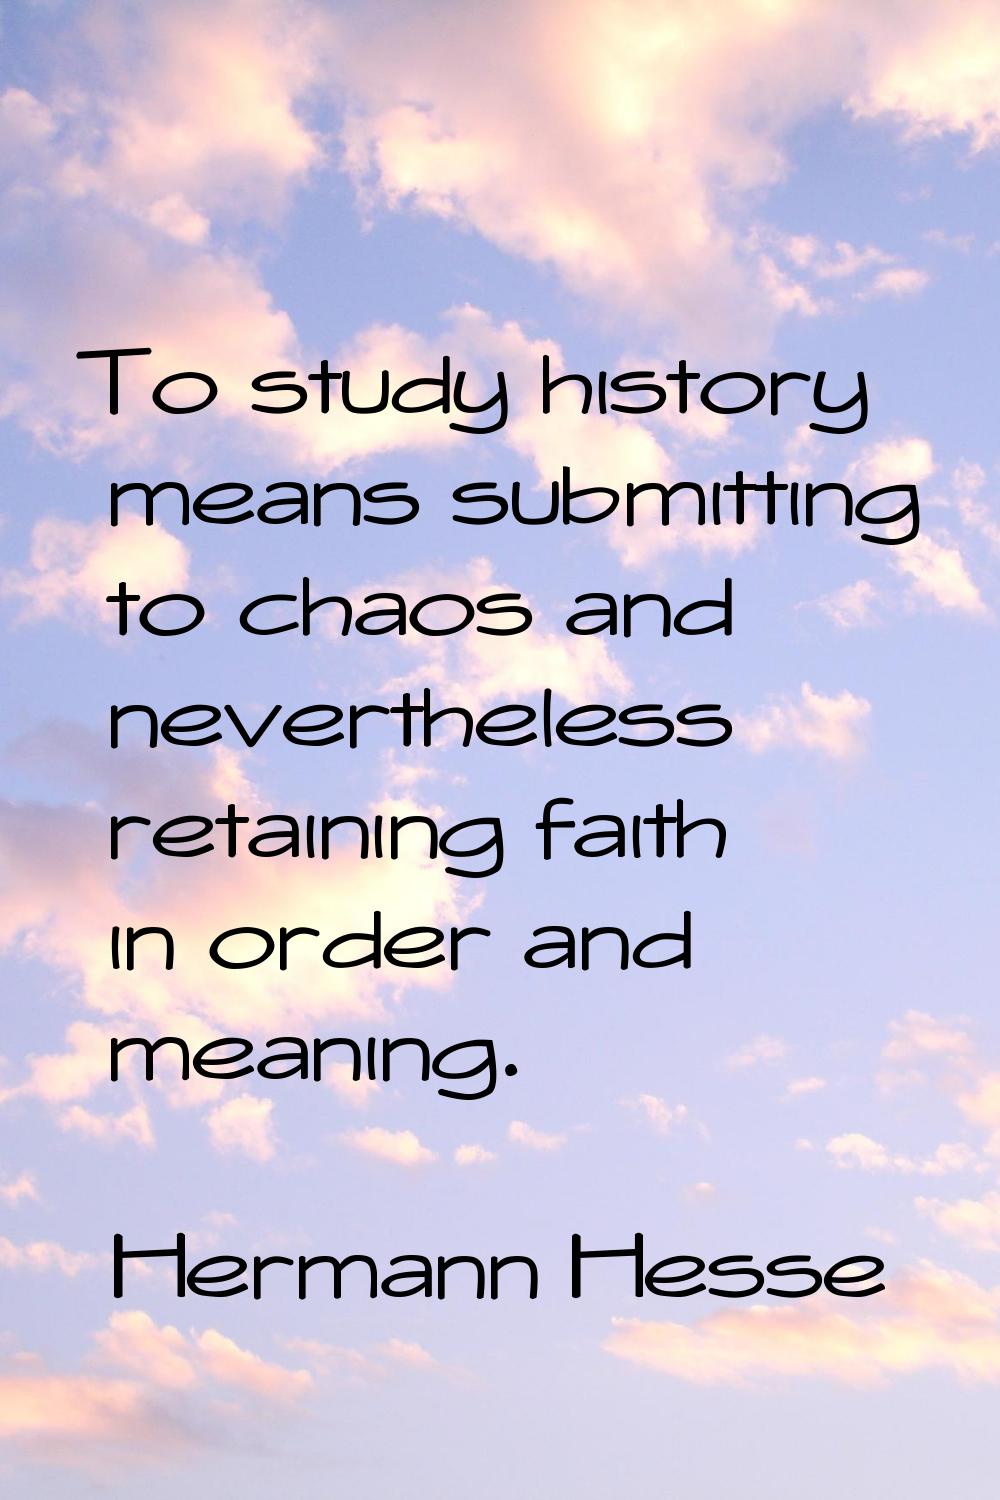 To study history means submitting to chaos and nevertheless retaining faith in order and meaning.